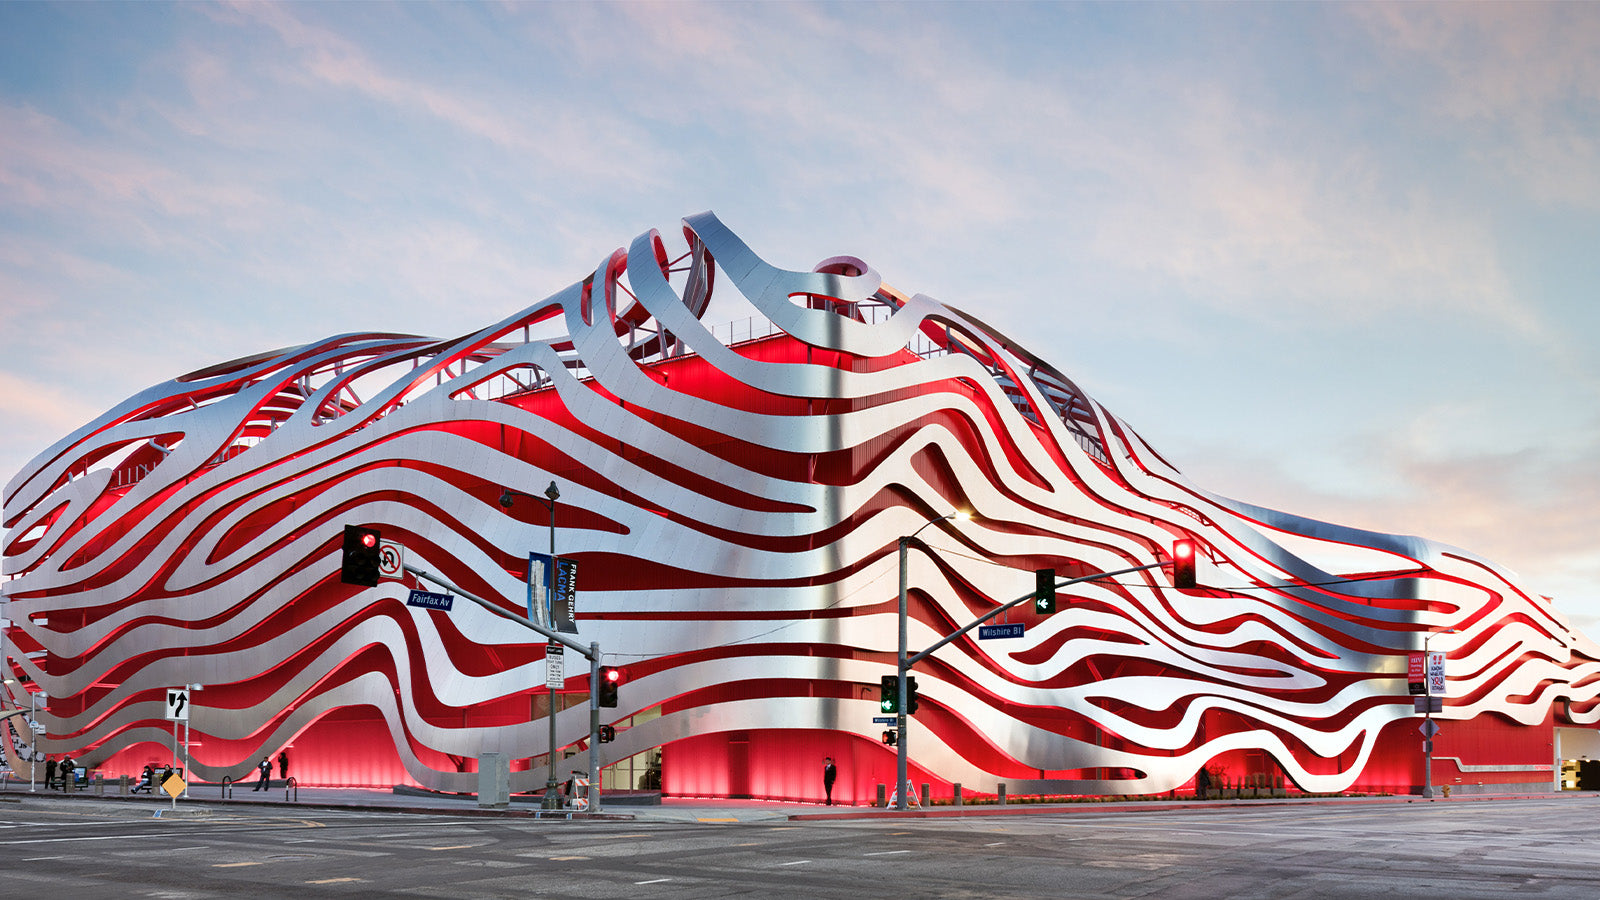 The Petersen Automative Museum exterior in Los Angeles.